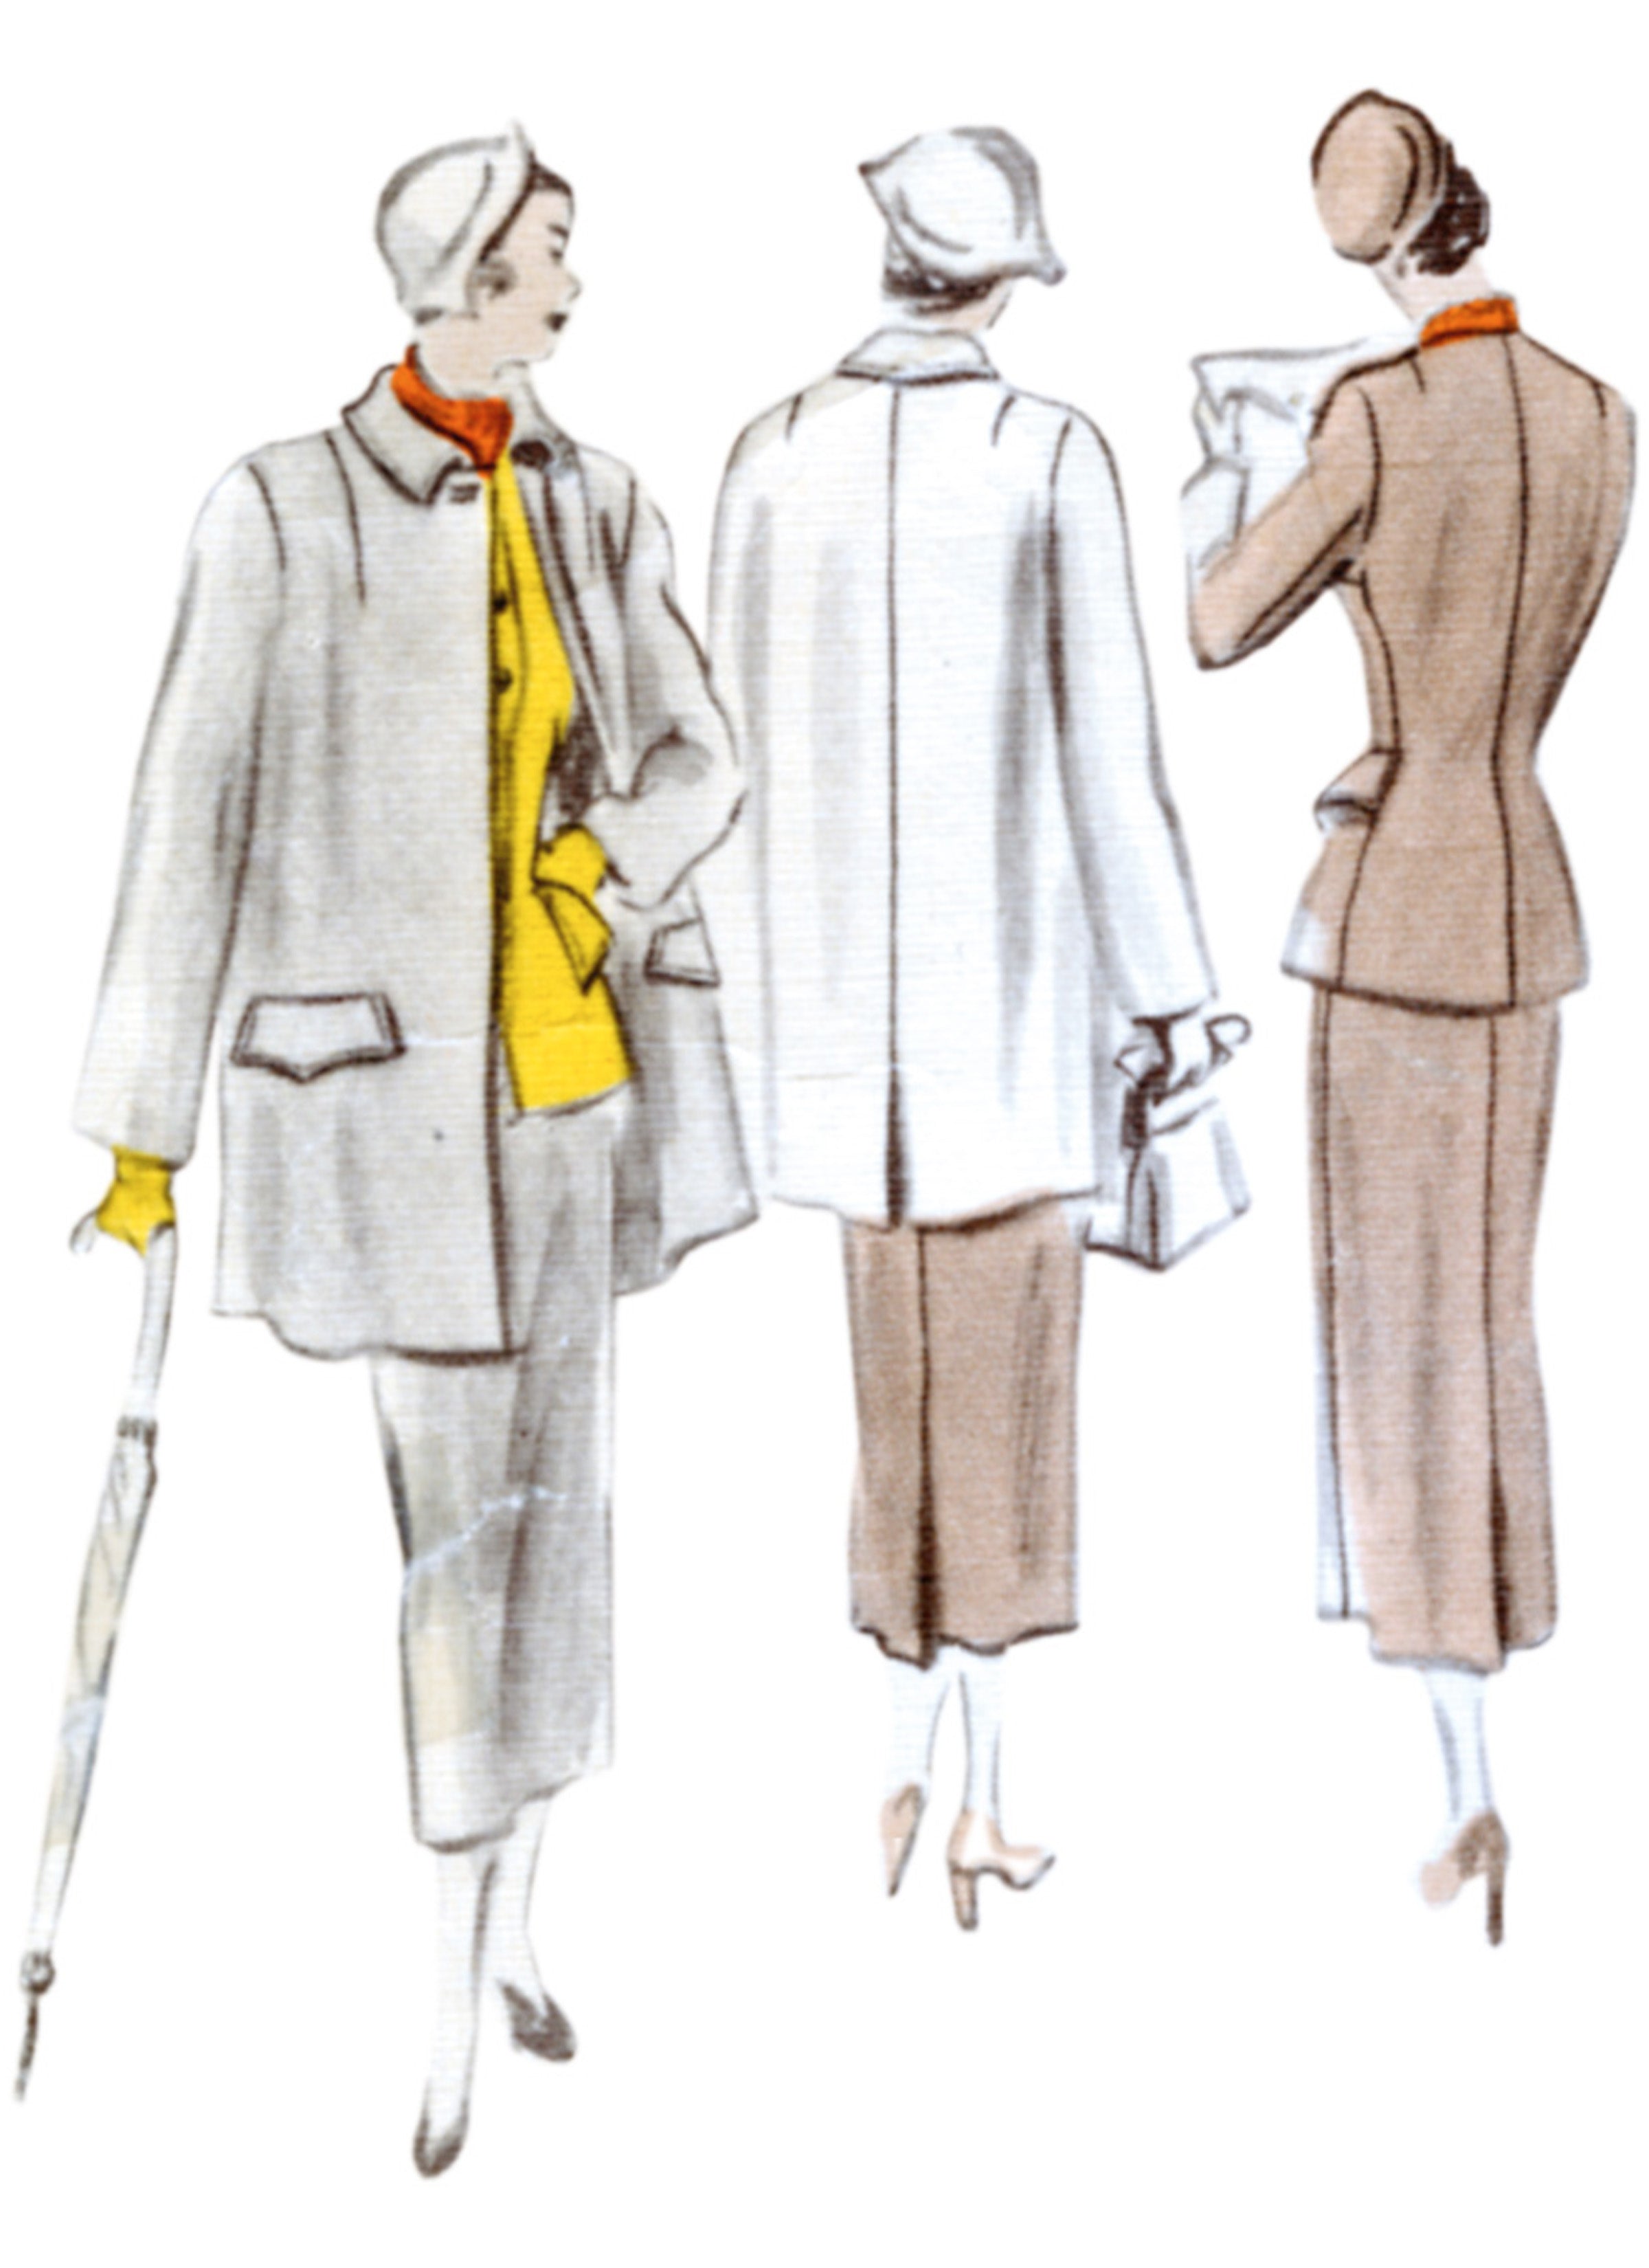 Vogue Sewing Pattern 1932 Vintage Suit and Coat from Jaycotts Sewing Supplies